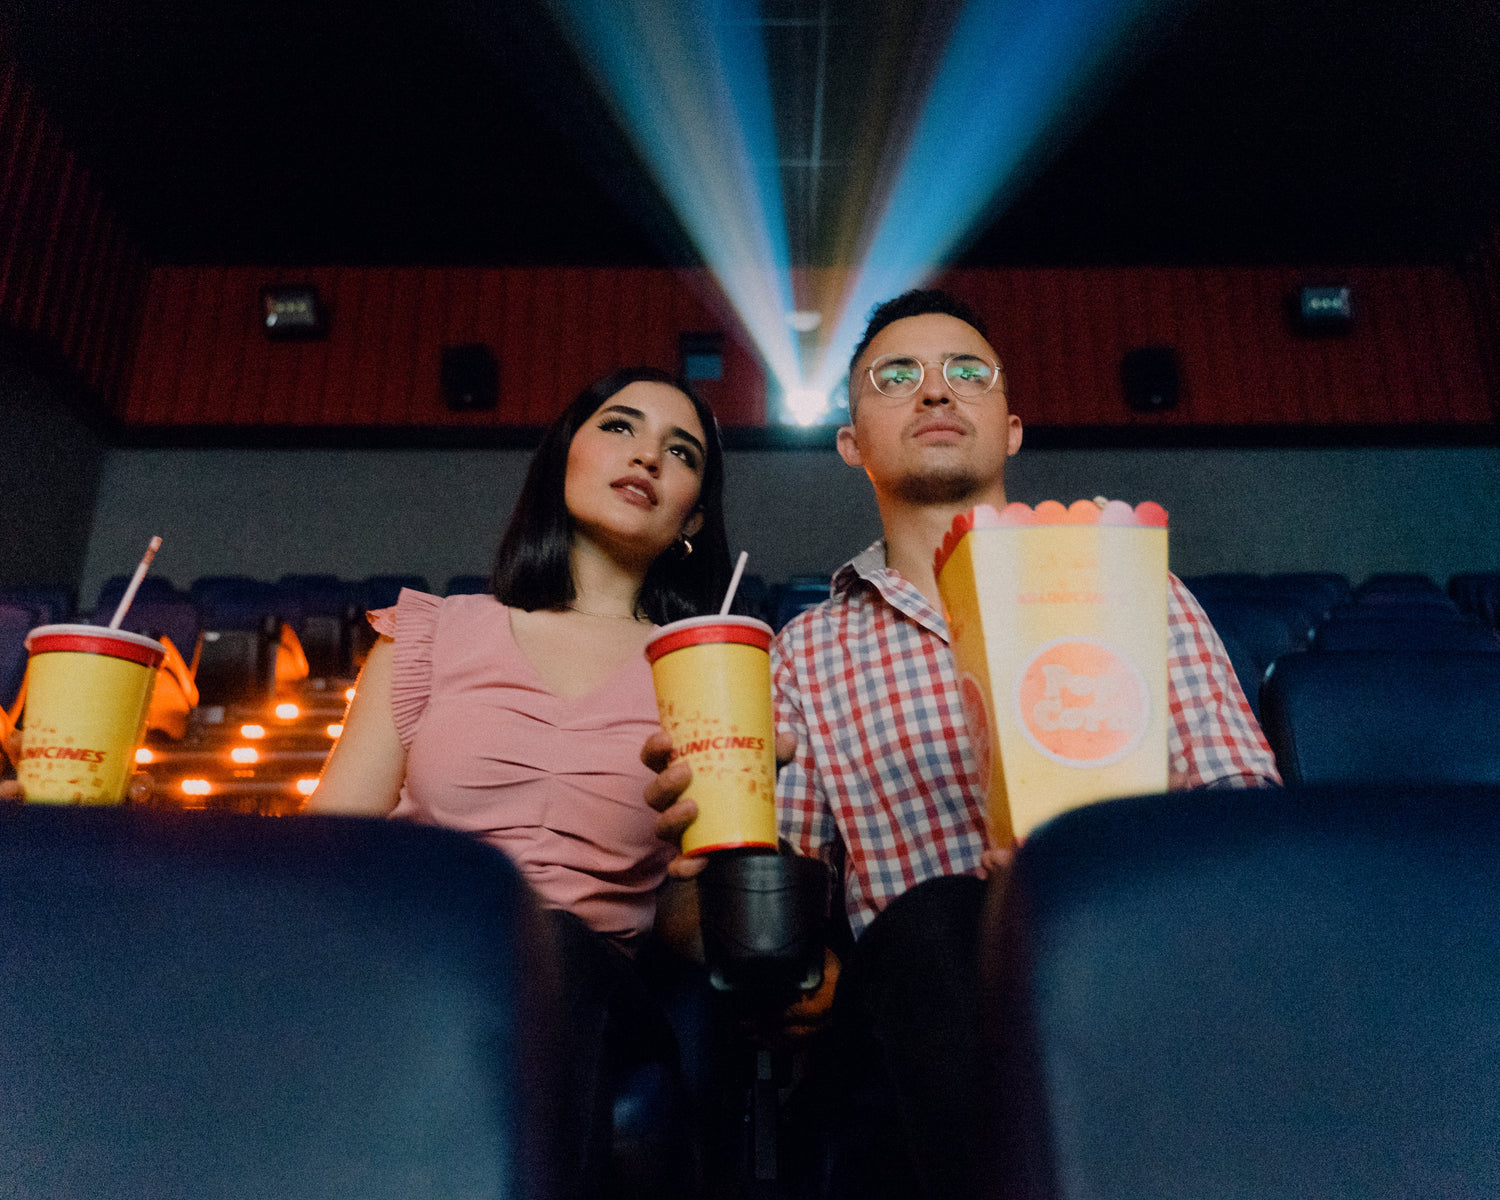 Couple in the cinema watching a film